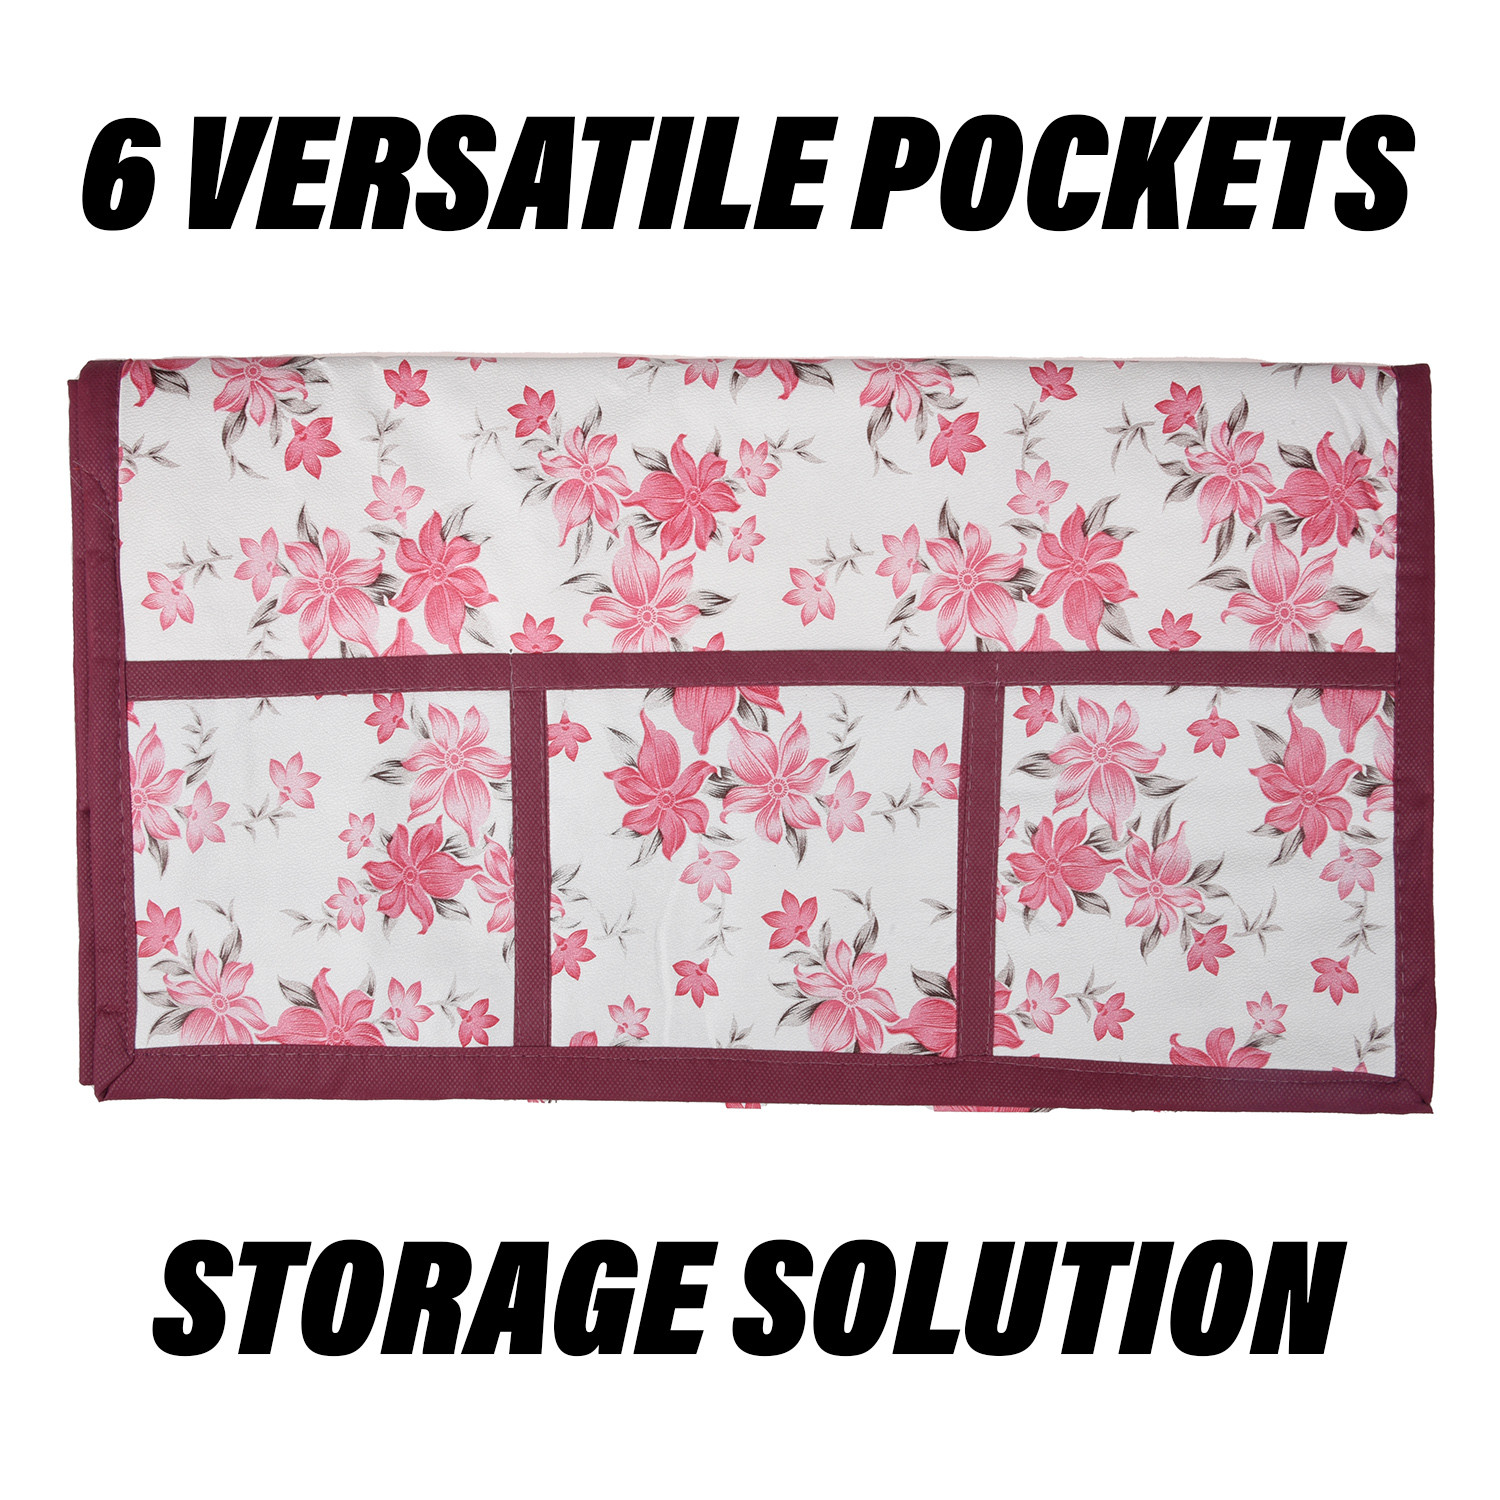 Kuber Industries Fridge Top Cover & Handle Cover Set | Fridge Top & Handle Cover Set | Refrigerator Cover & Handle Cover Combo Set | Barik Flower Fridge & Handle Cover | Pink